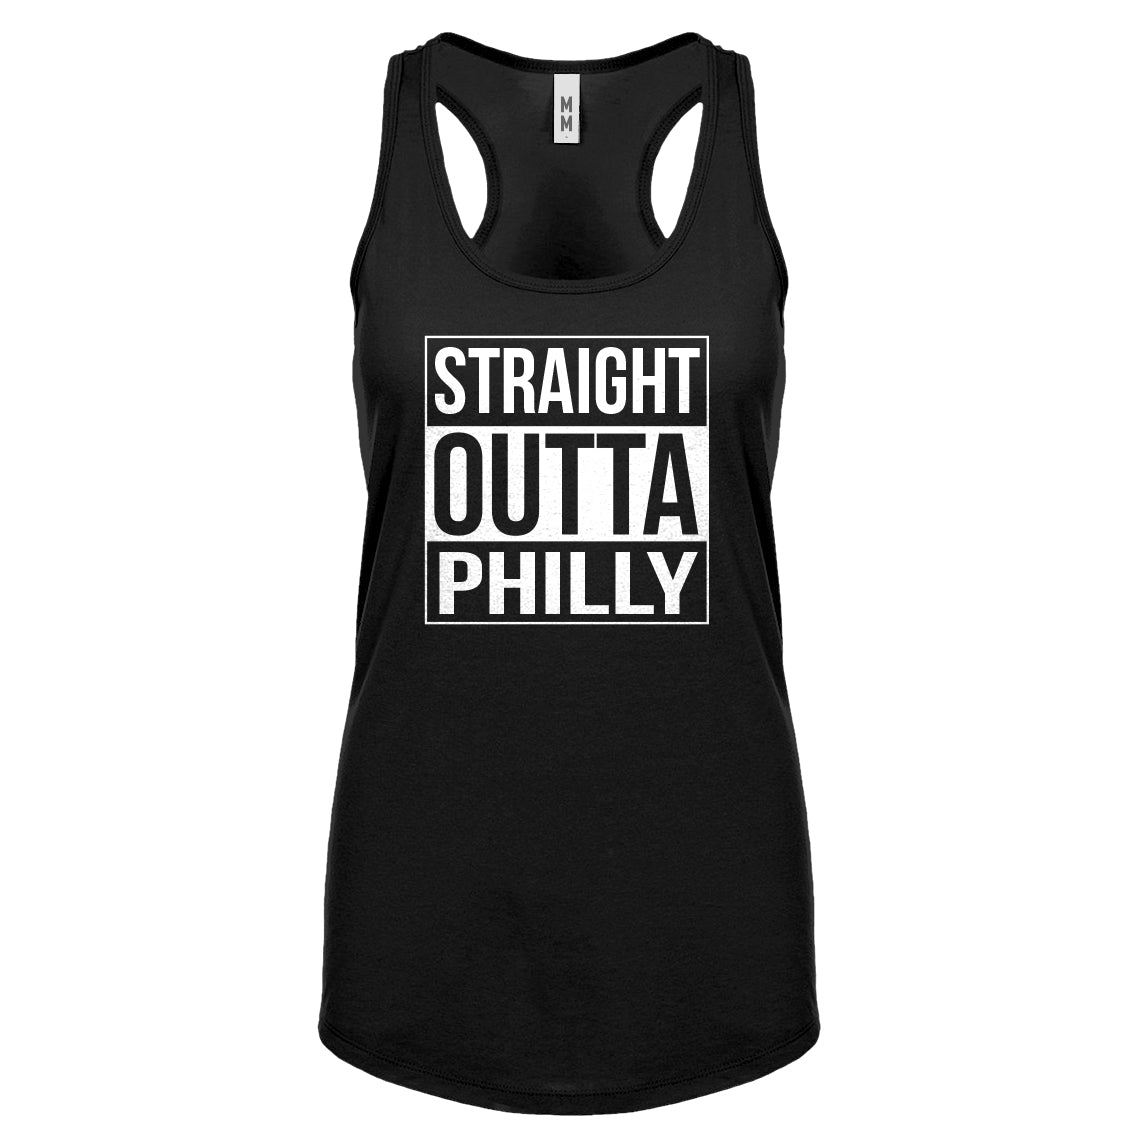 Straight Outta Philly Womens Racerback Tank Top